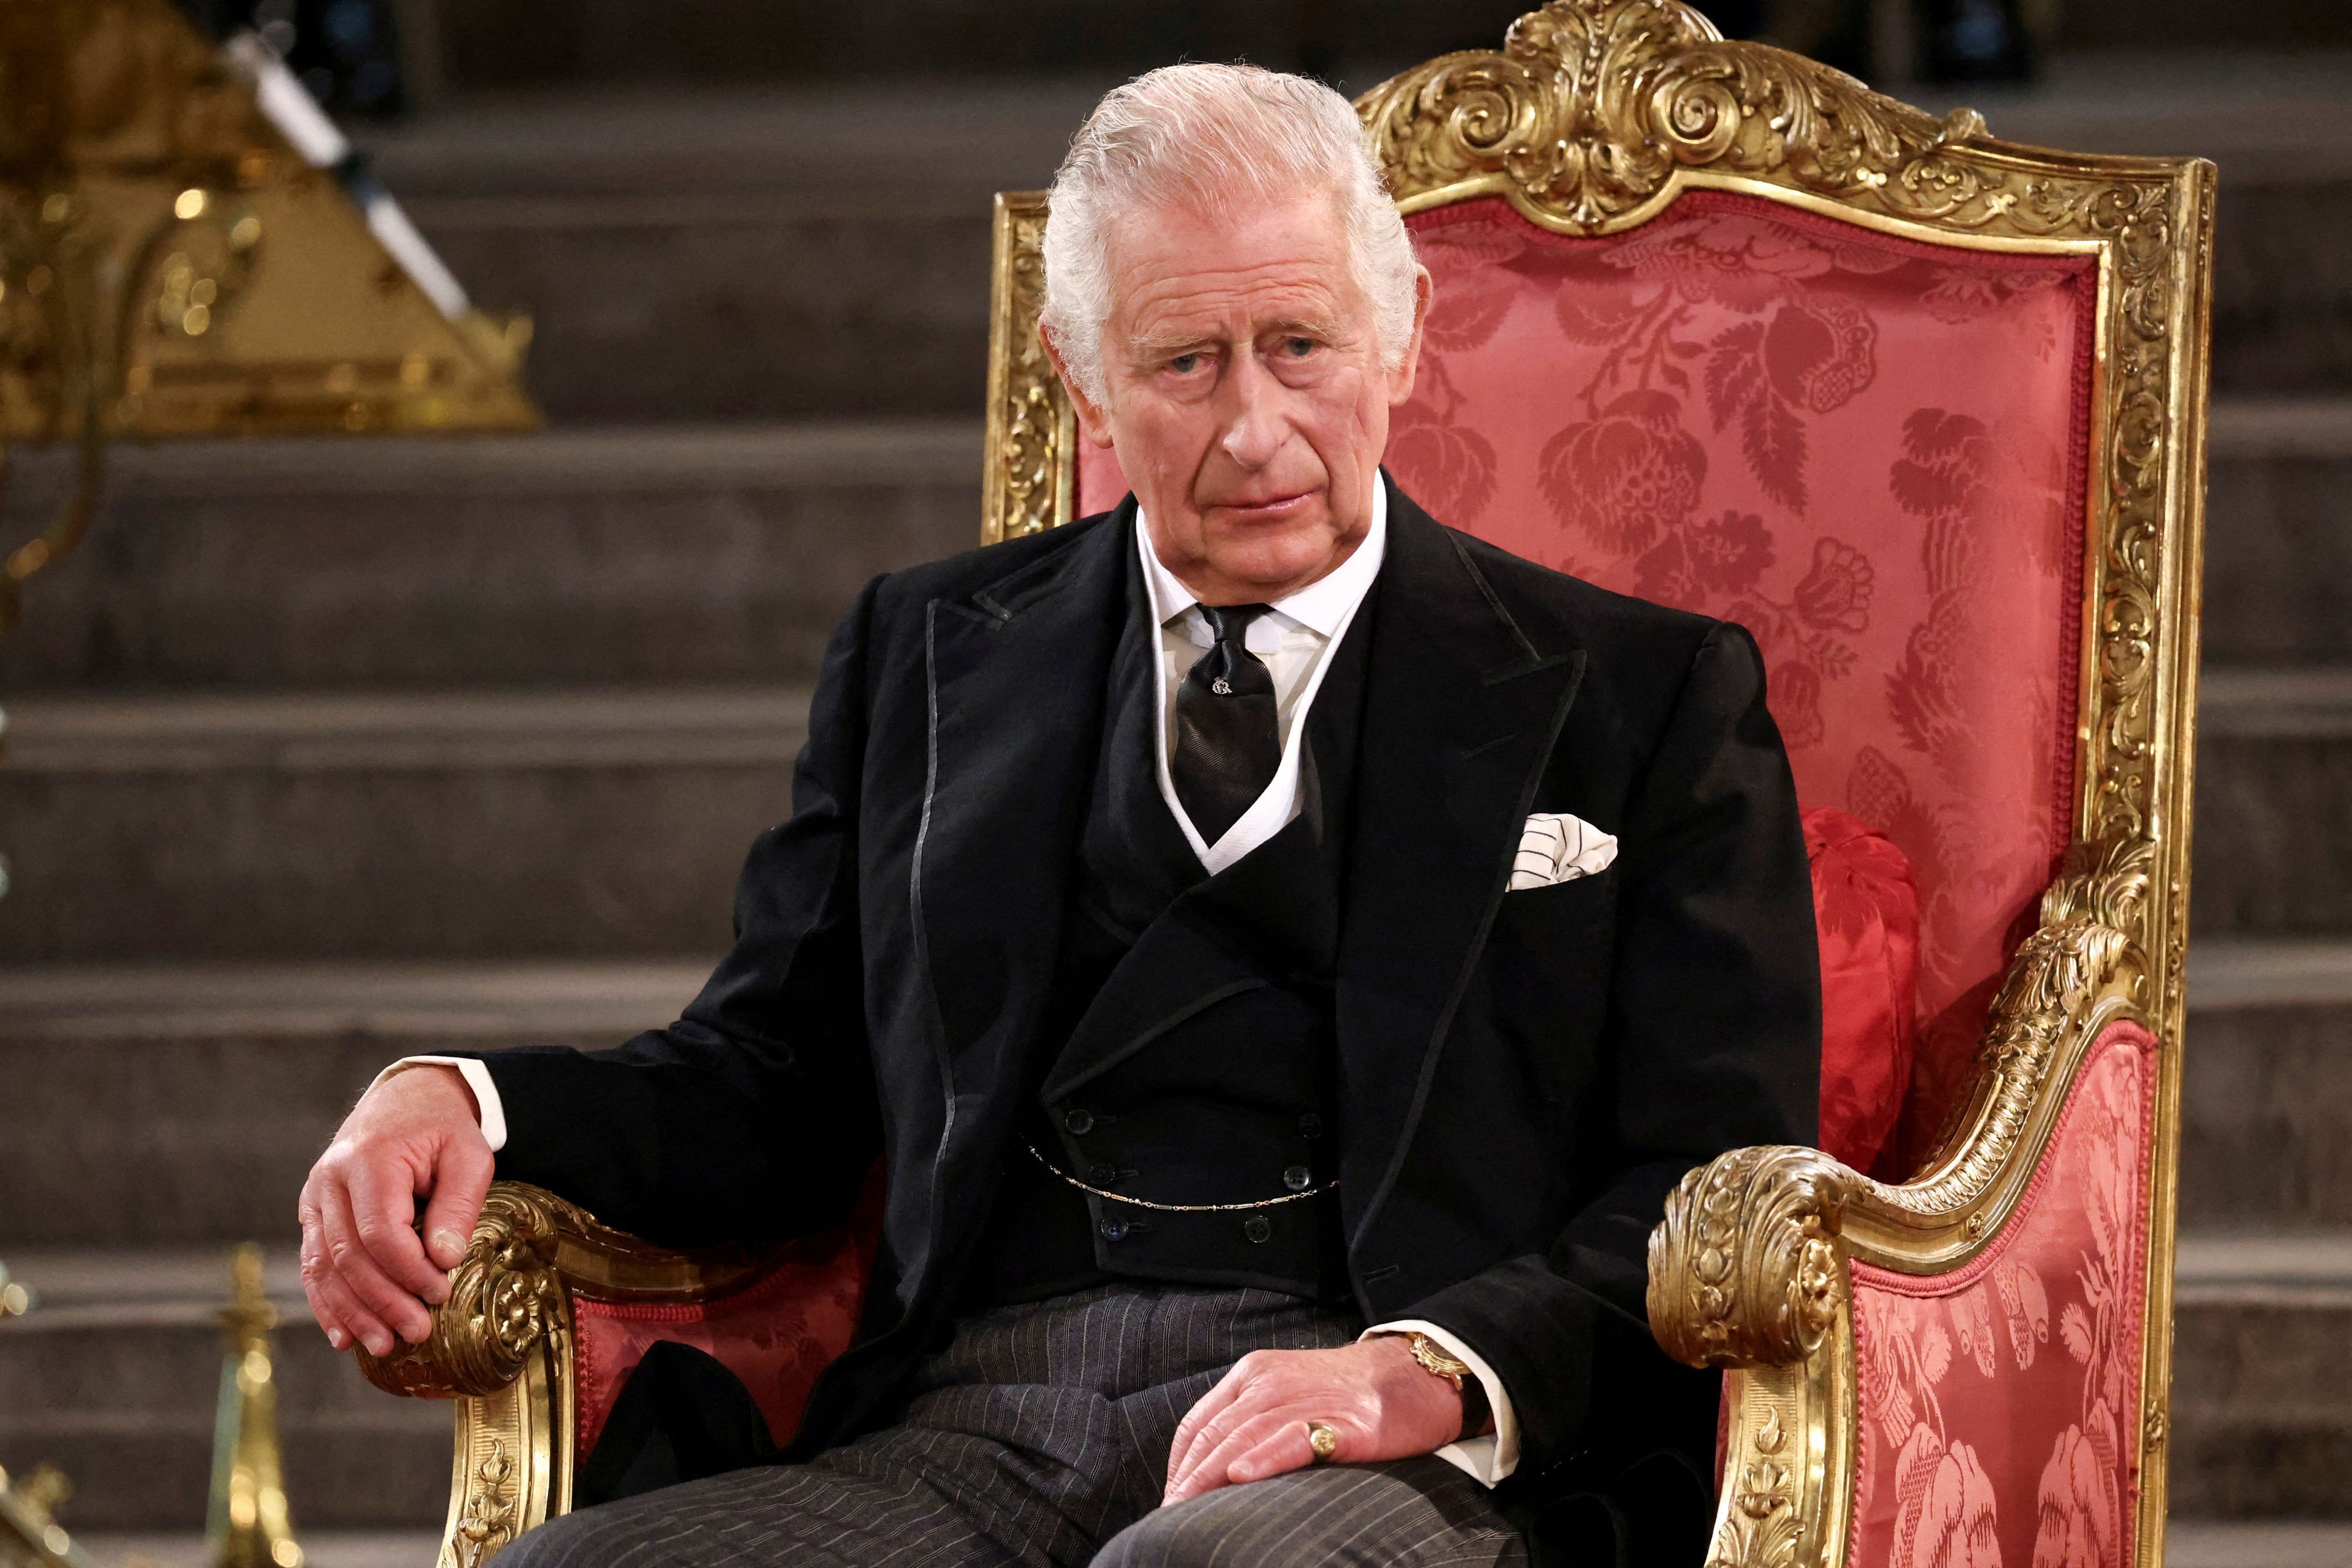 King Charles' coronation: Commonwealth hard hit by climate impacts | Context